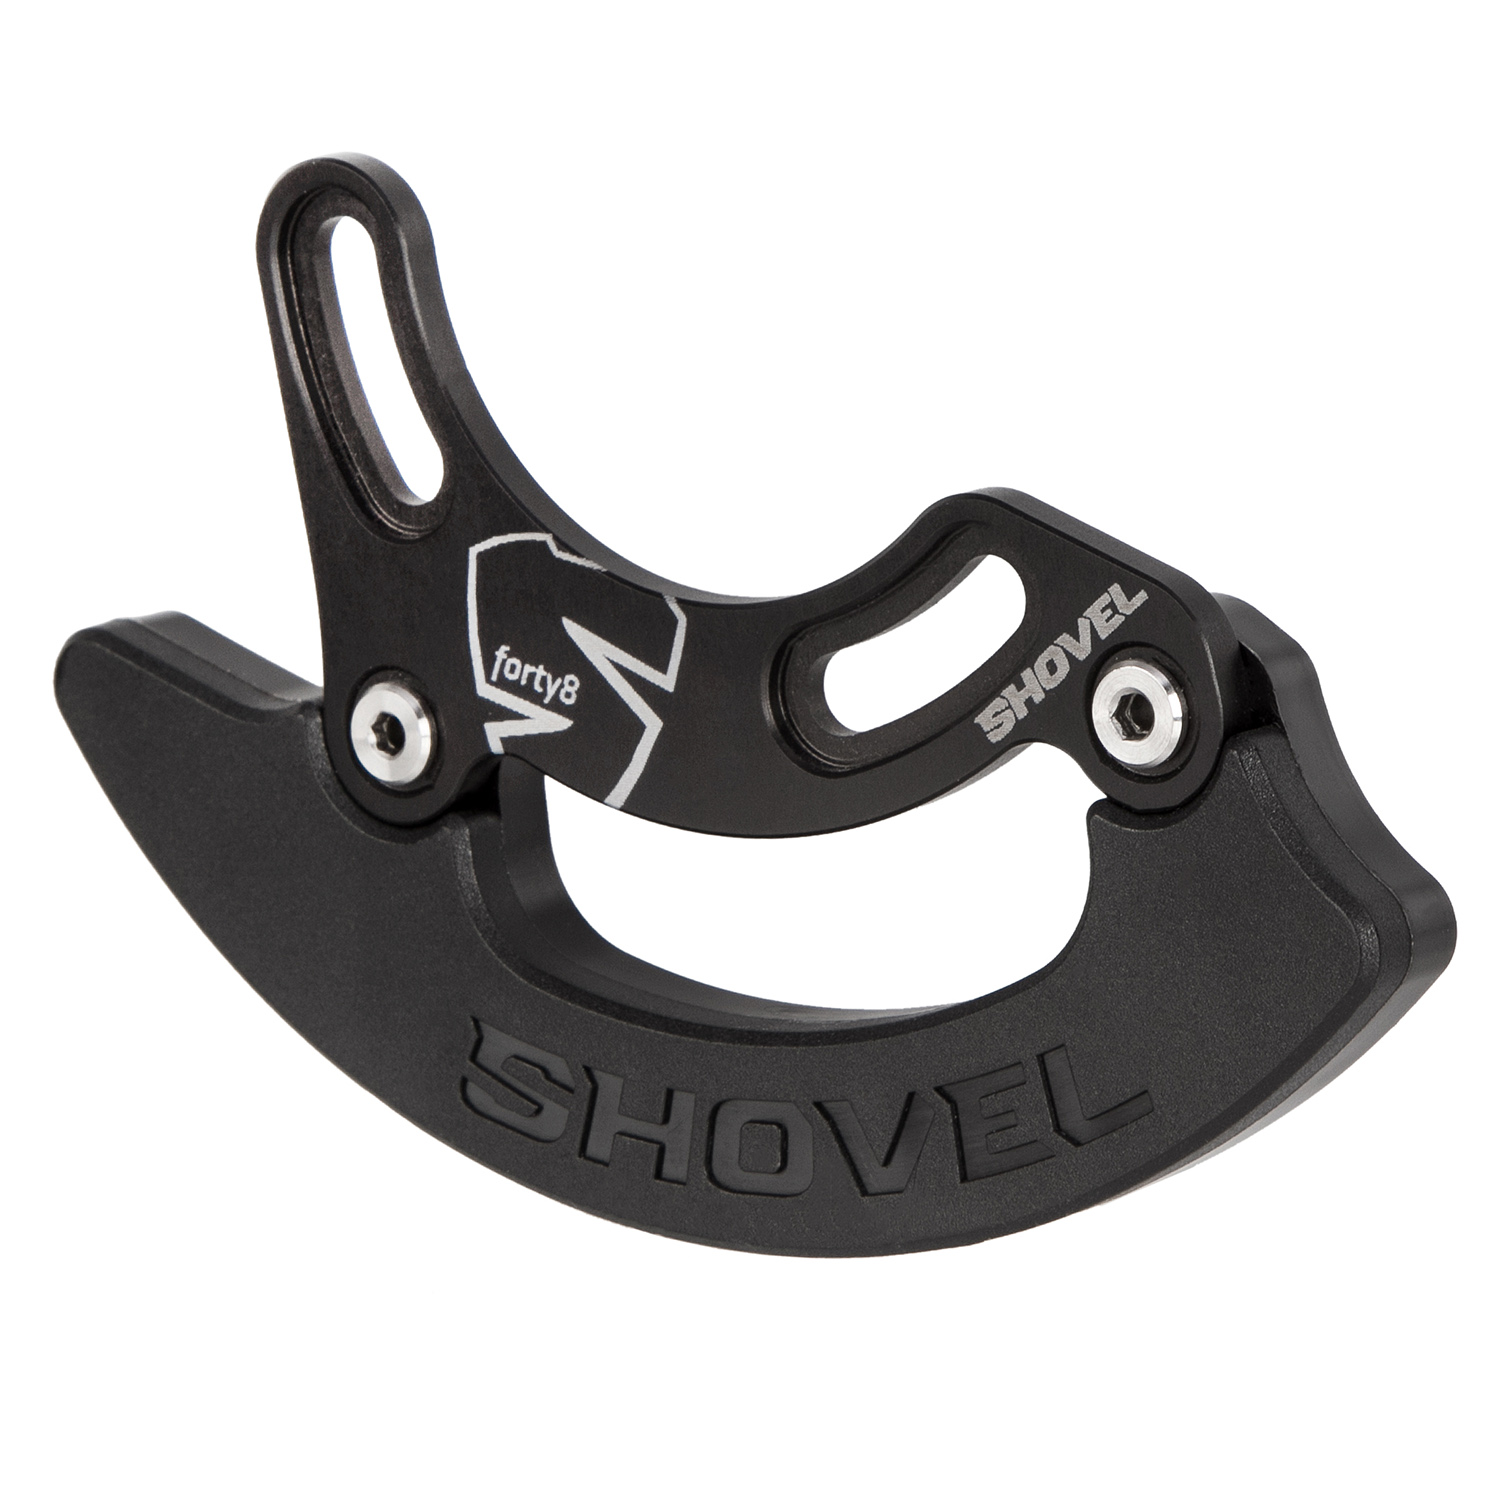 Shovel Chain Guide Forty8 Black, 28-36 Teeth, ISCG05